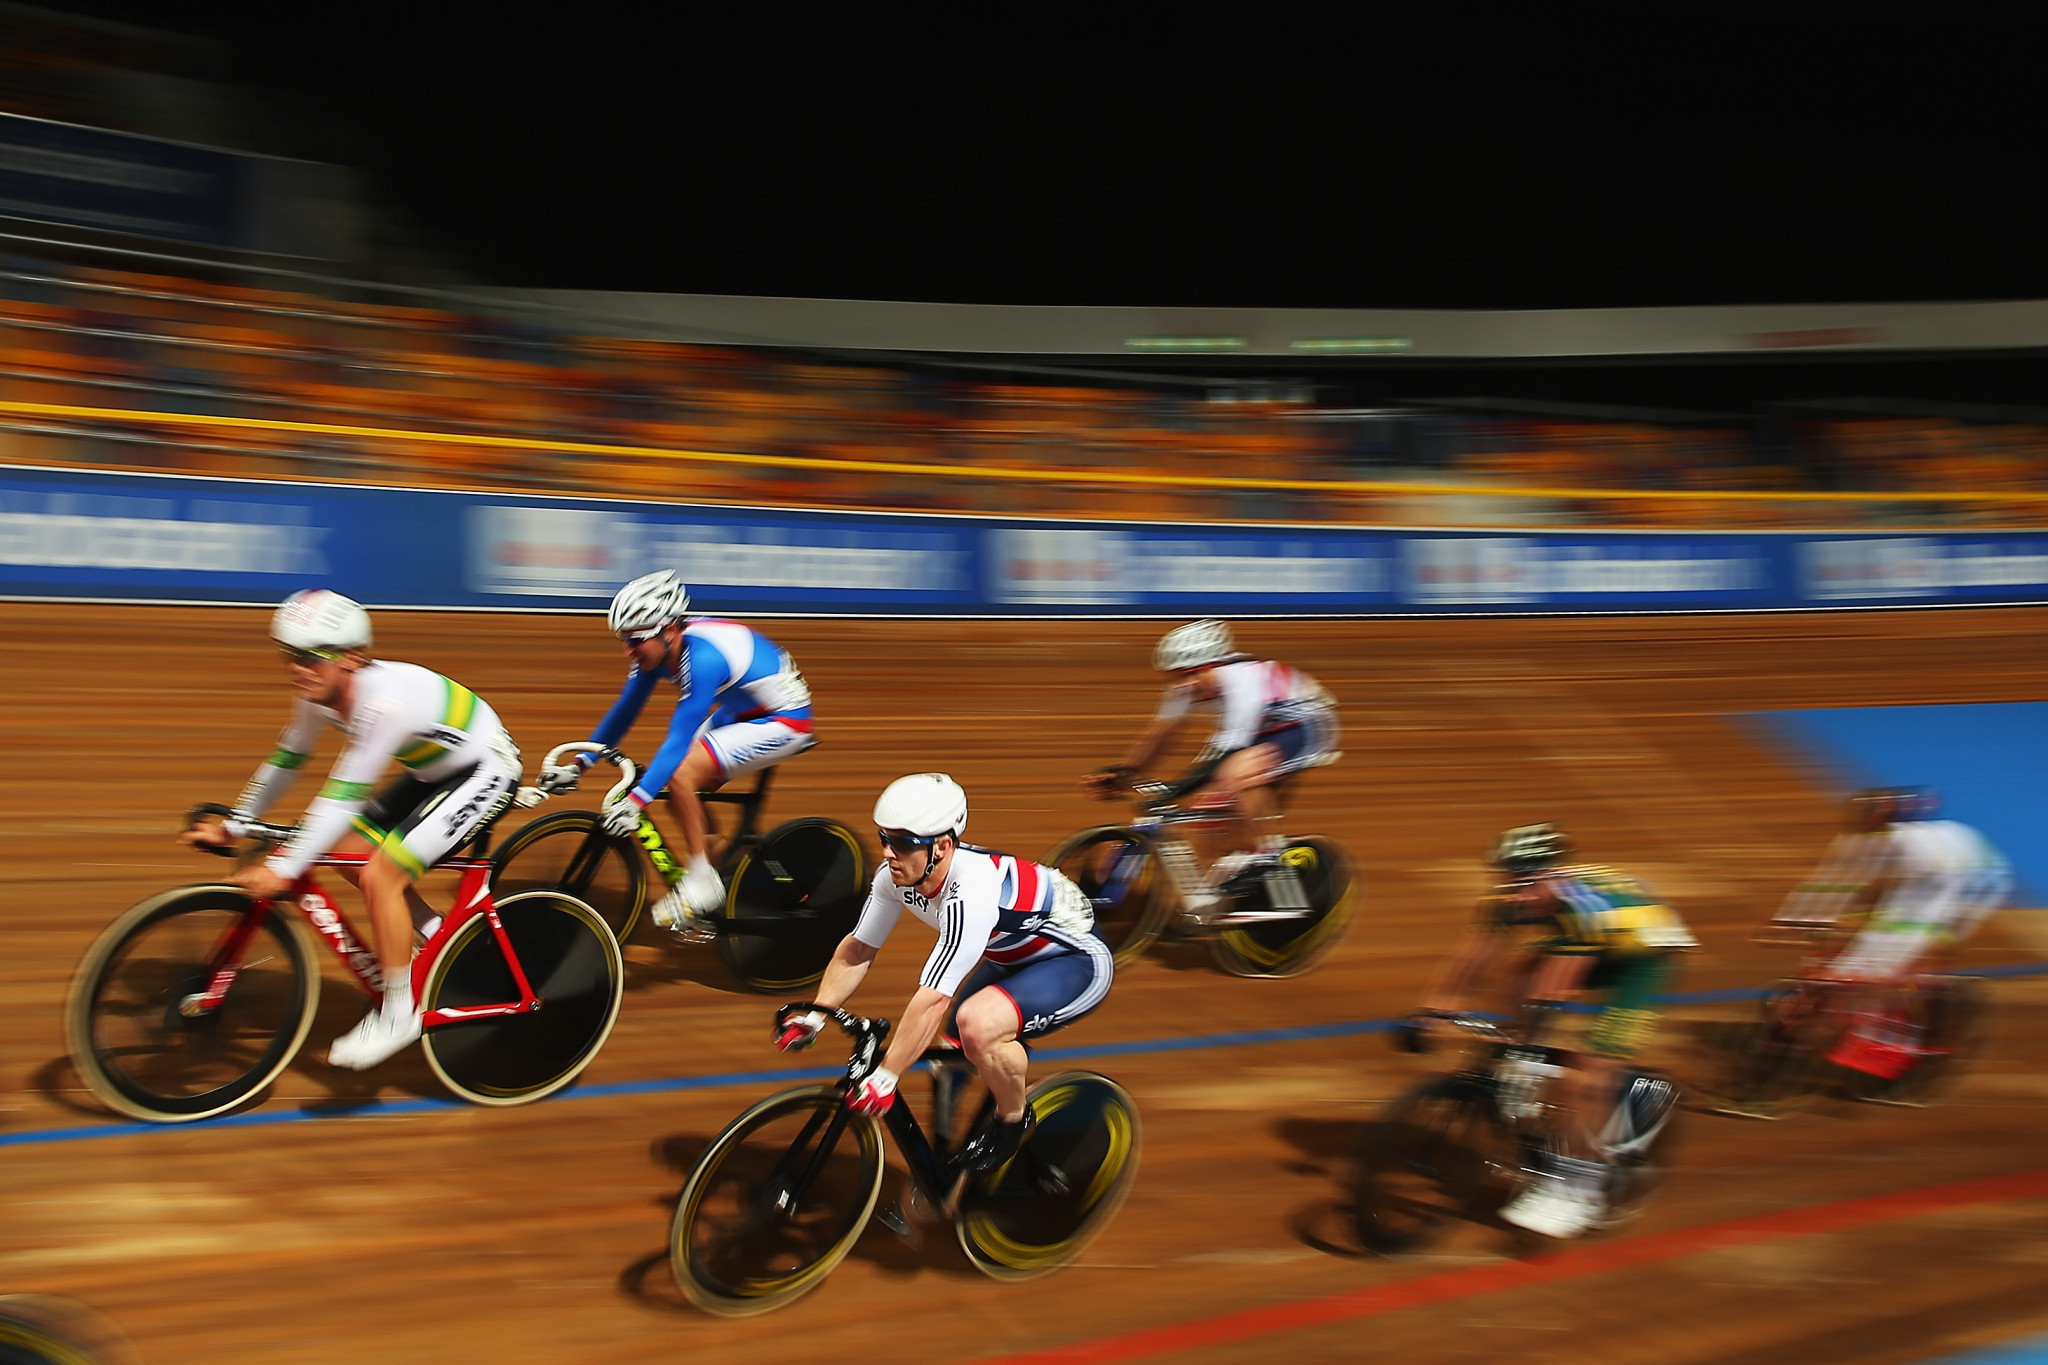 The UCI Para-Cycling Track World Championships were due to be held in Rio de Janeiro last year, but were cancelled due to the COVID-19 pandemic ©Getty Images